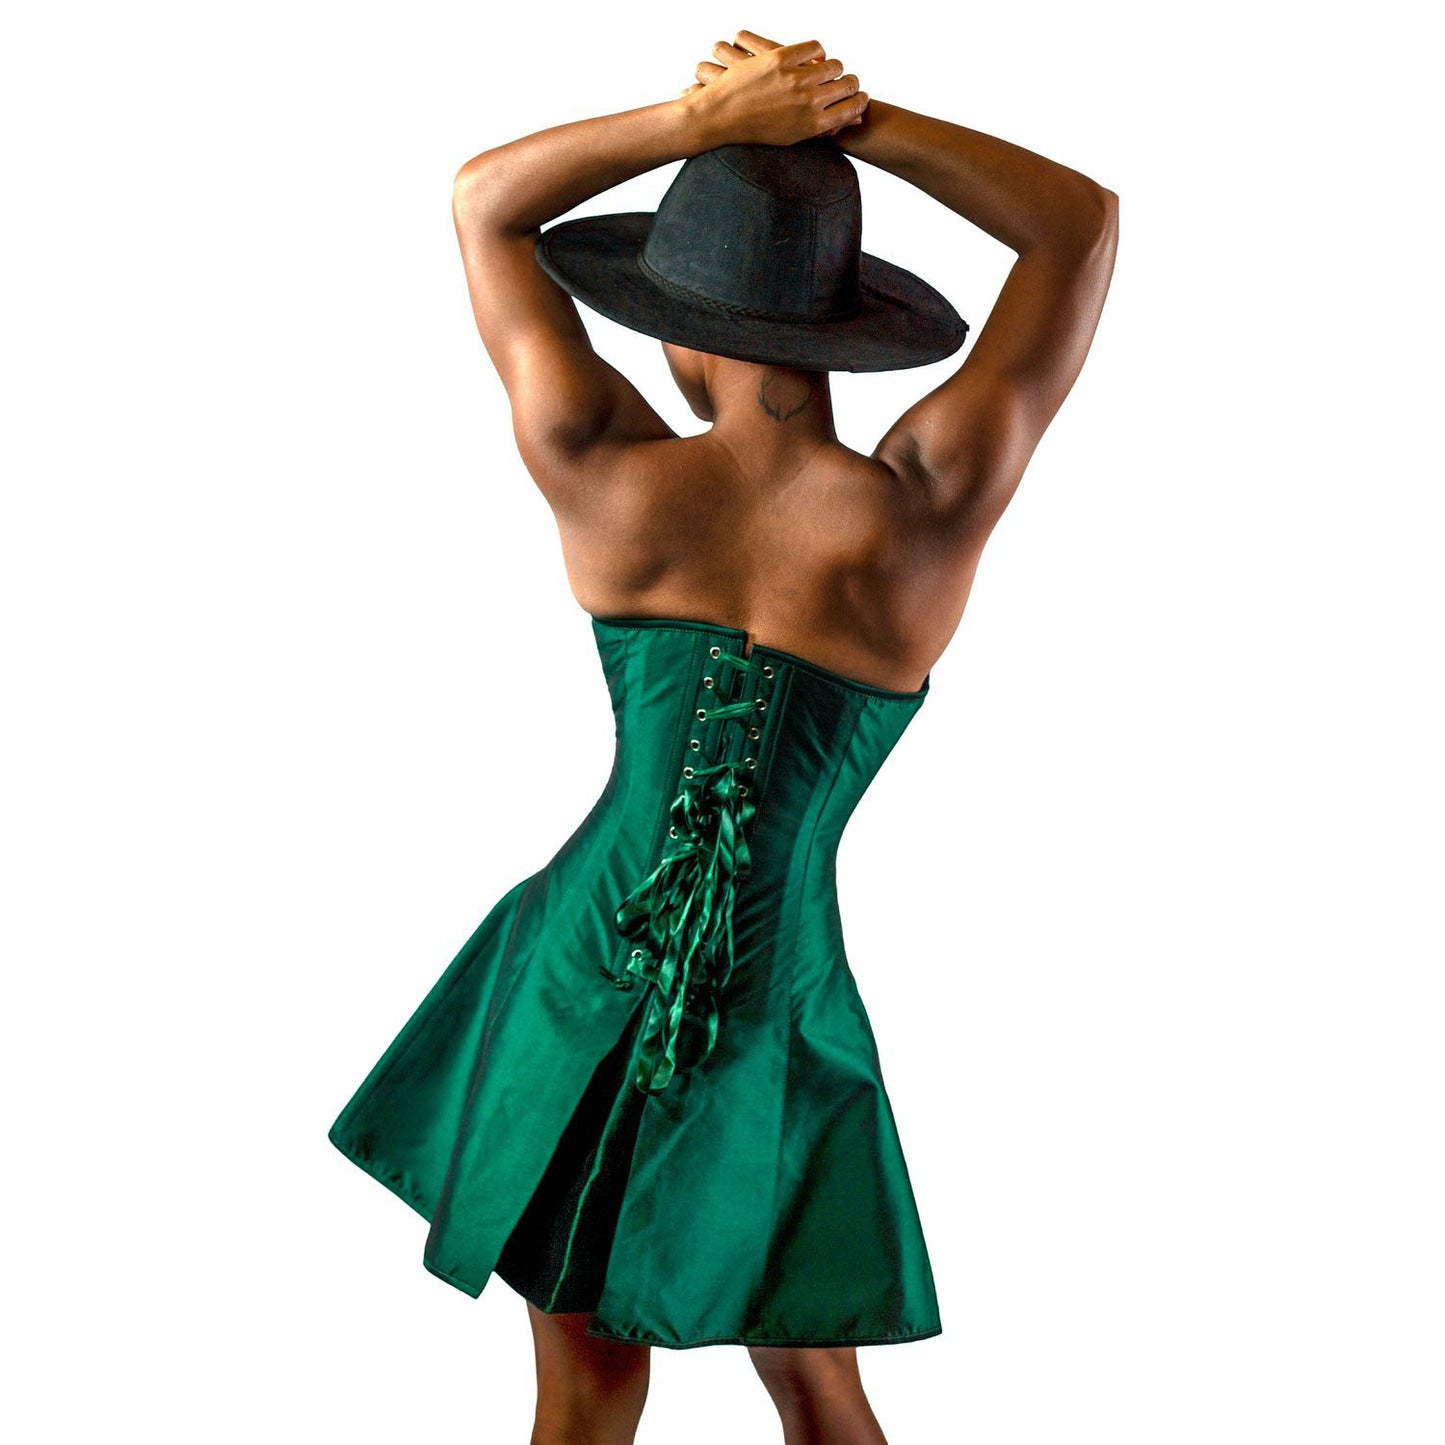 A model wearing the Forest Green Taffeta Skirted Overbust Corset, rear view.